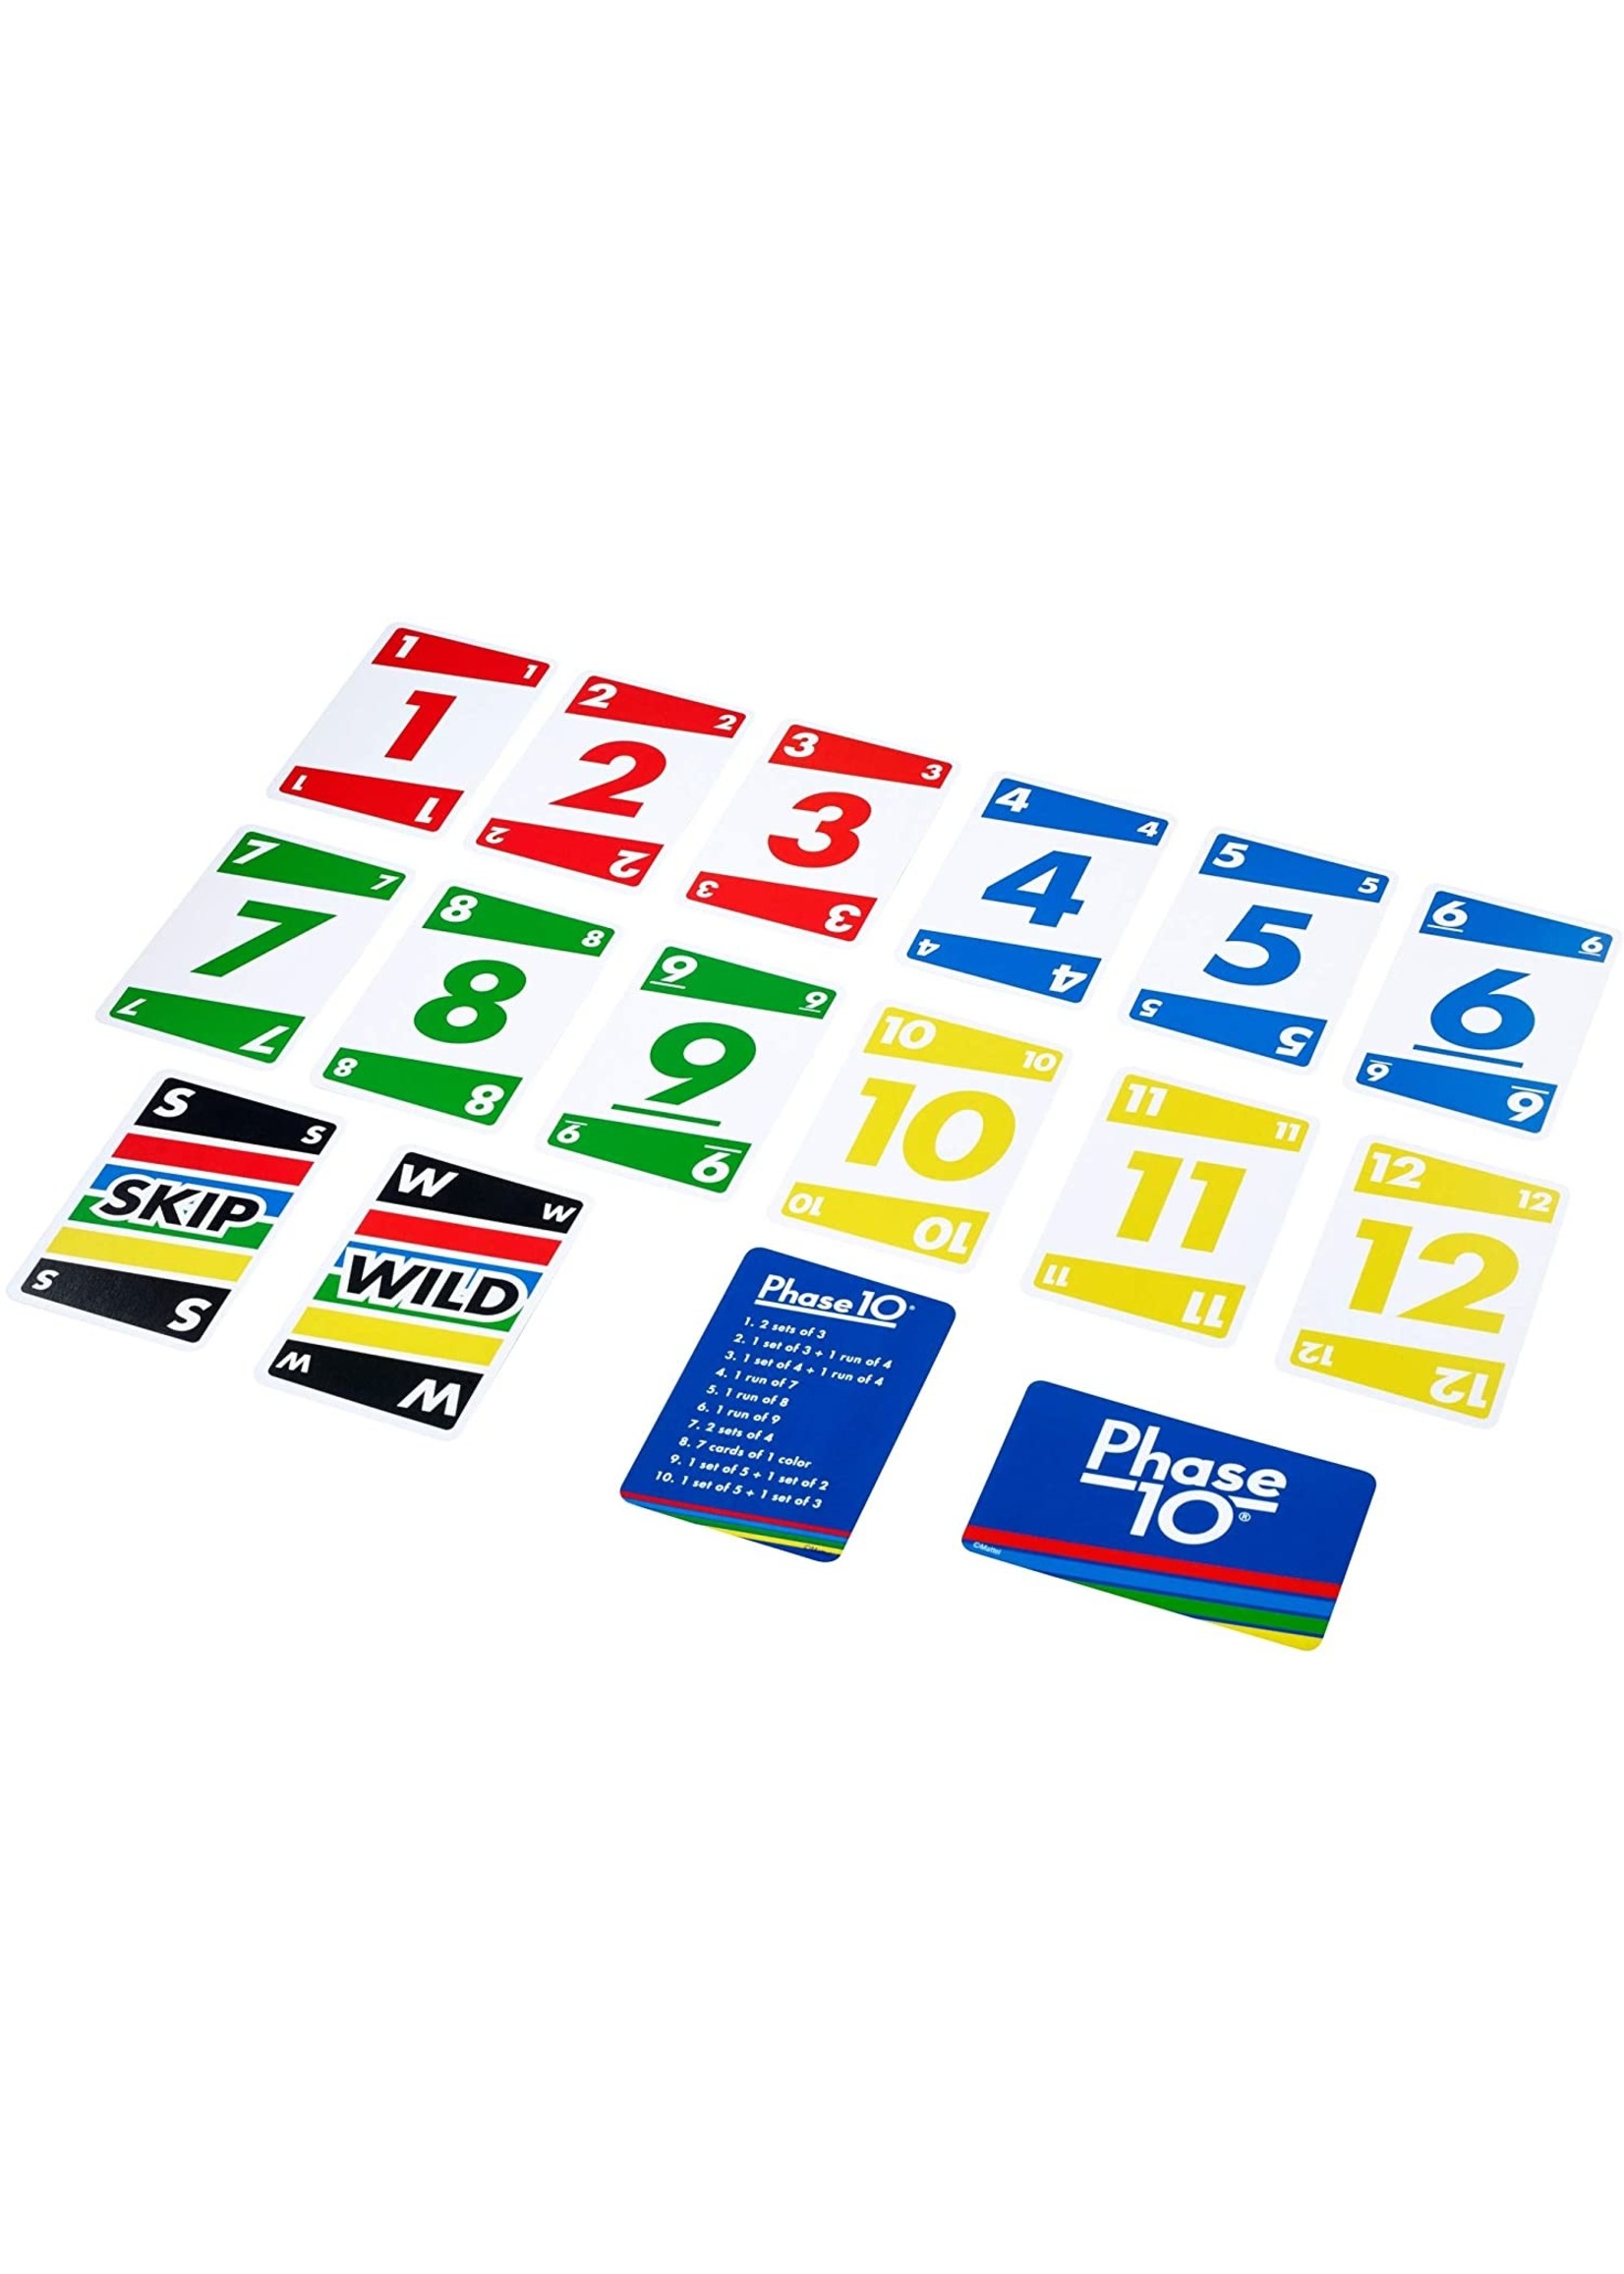  Phase 10 Twist Card Game : Toys & Games